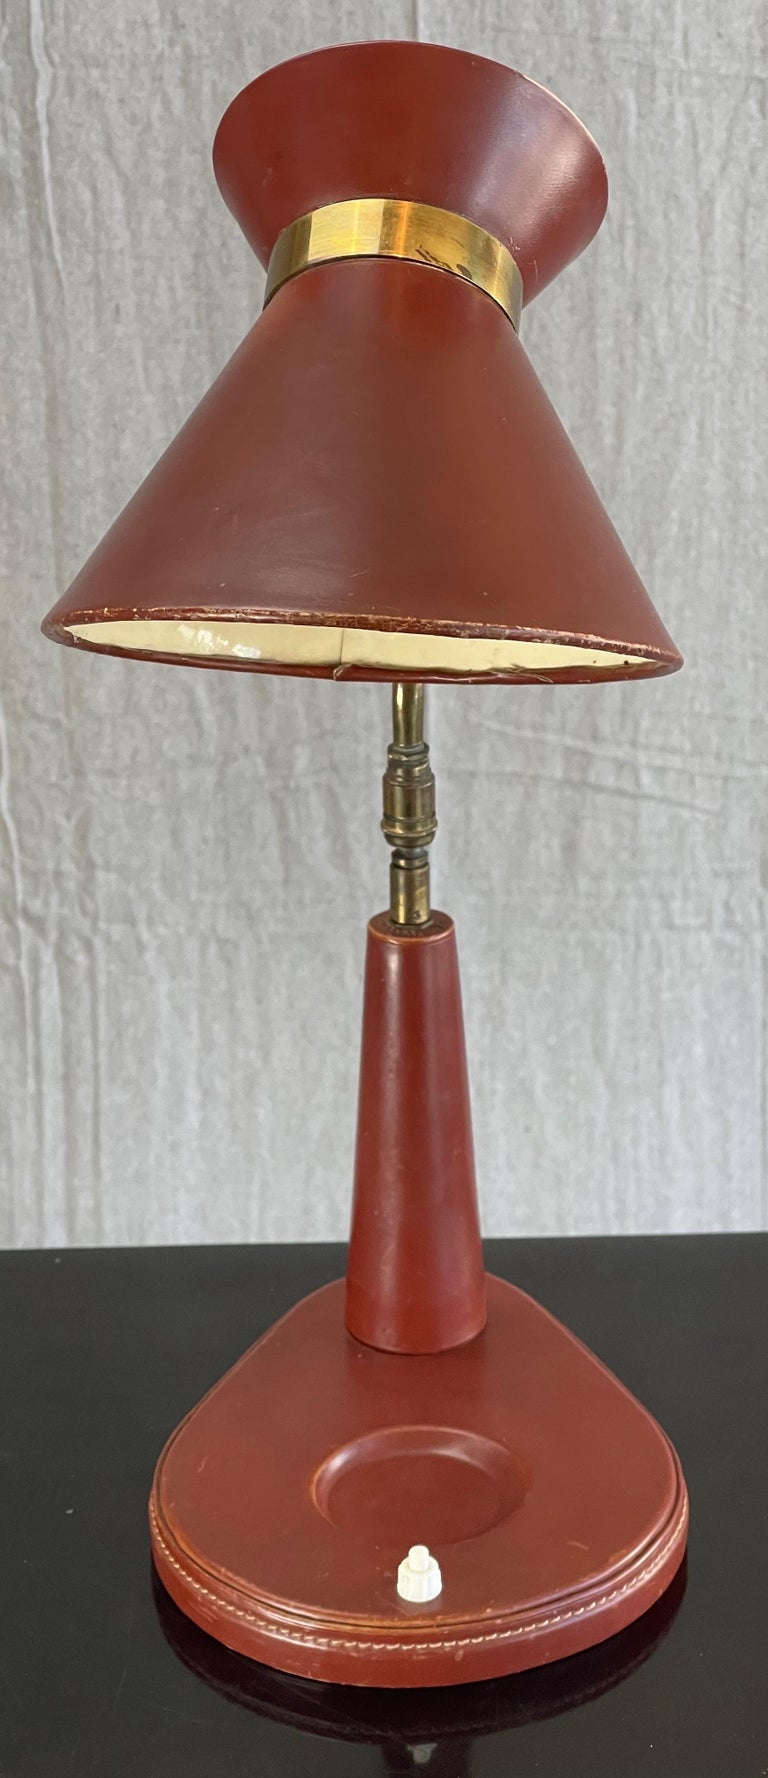 Here we have an excellent example of French Midcentury craftsmanship; A Jacques Adnet table lamp in hand stitched whiskey coloured leather. Jacques Adnet design is marked with the now iconic “Stiched Leather” style. This lamp has been lovingly used